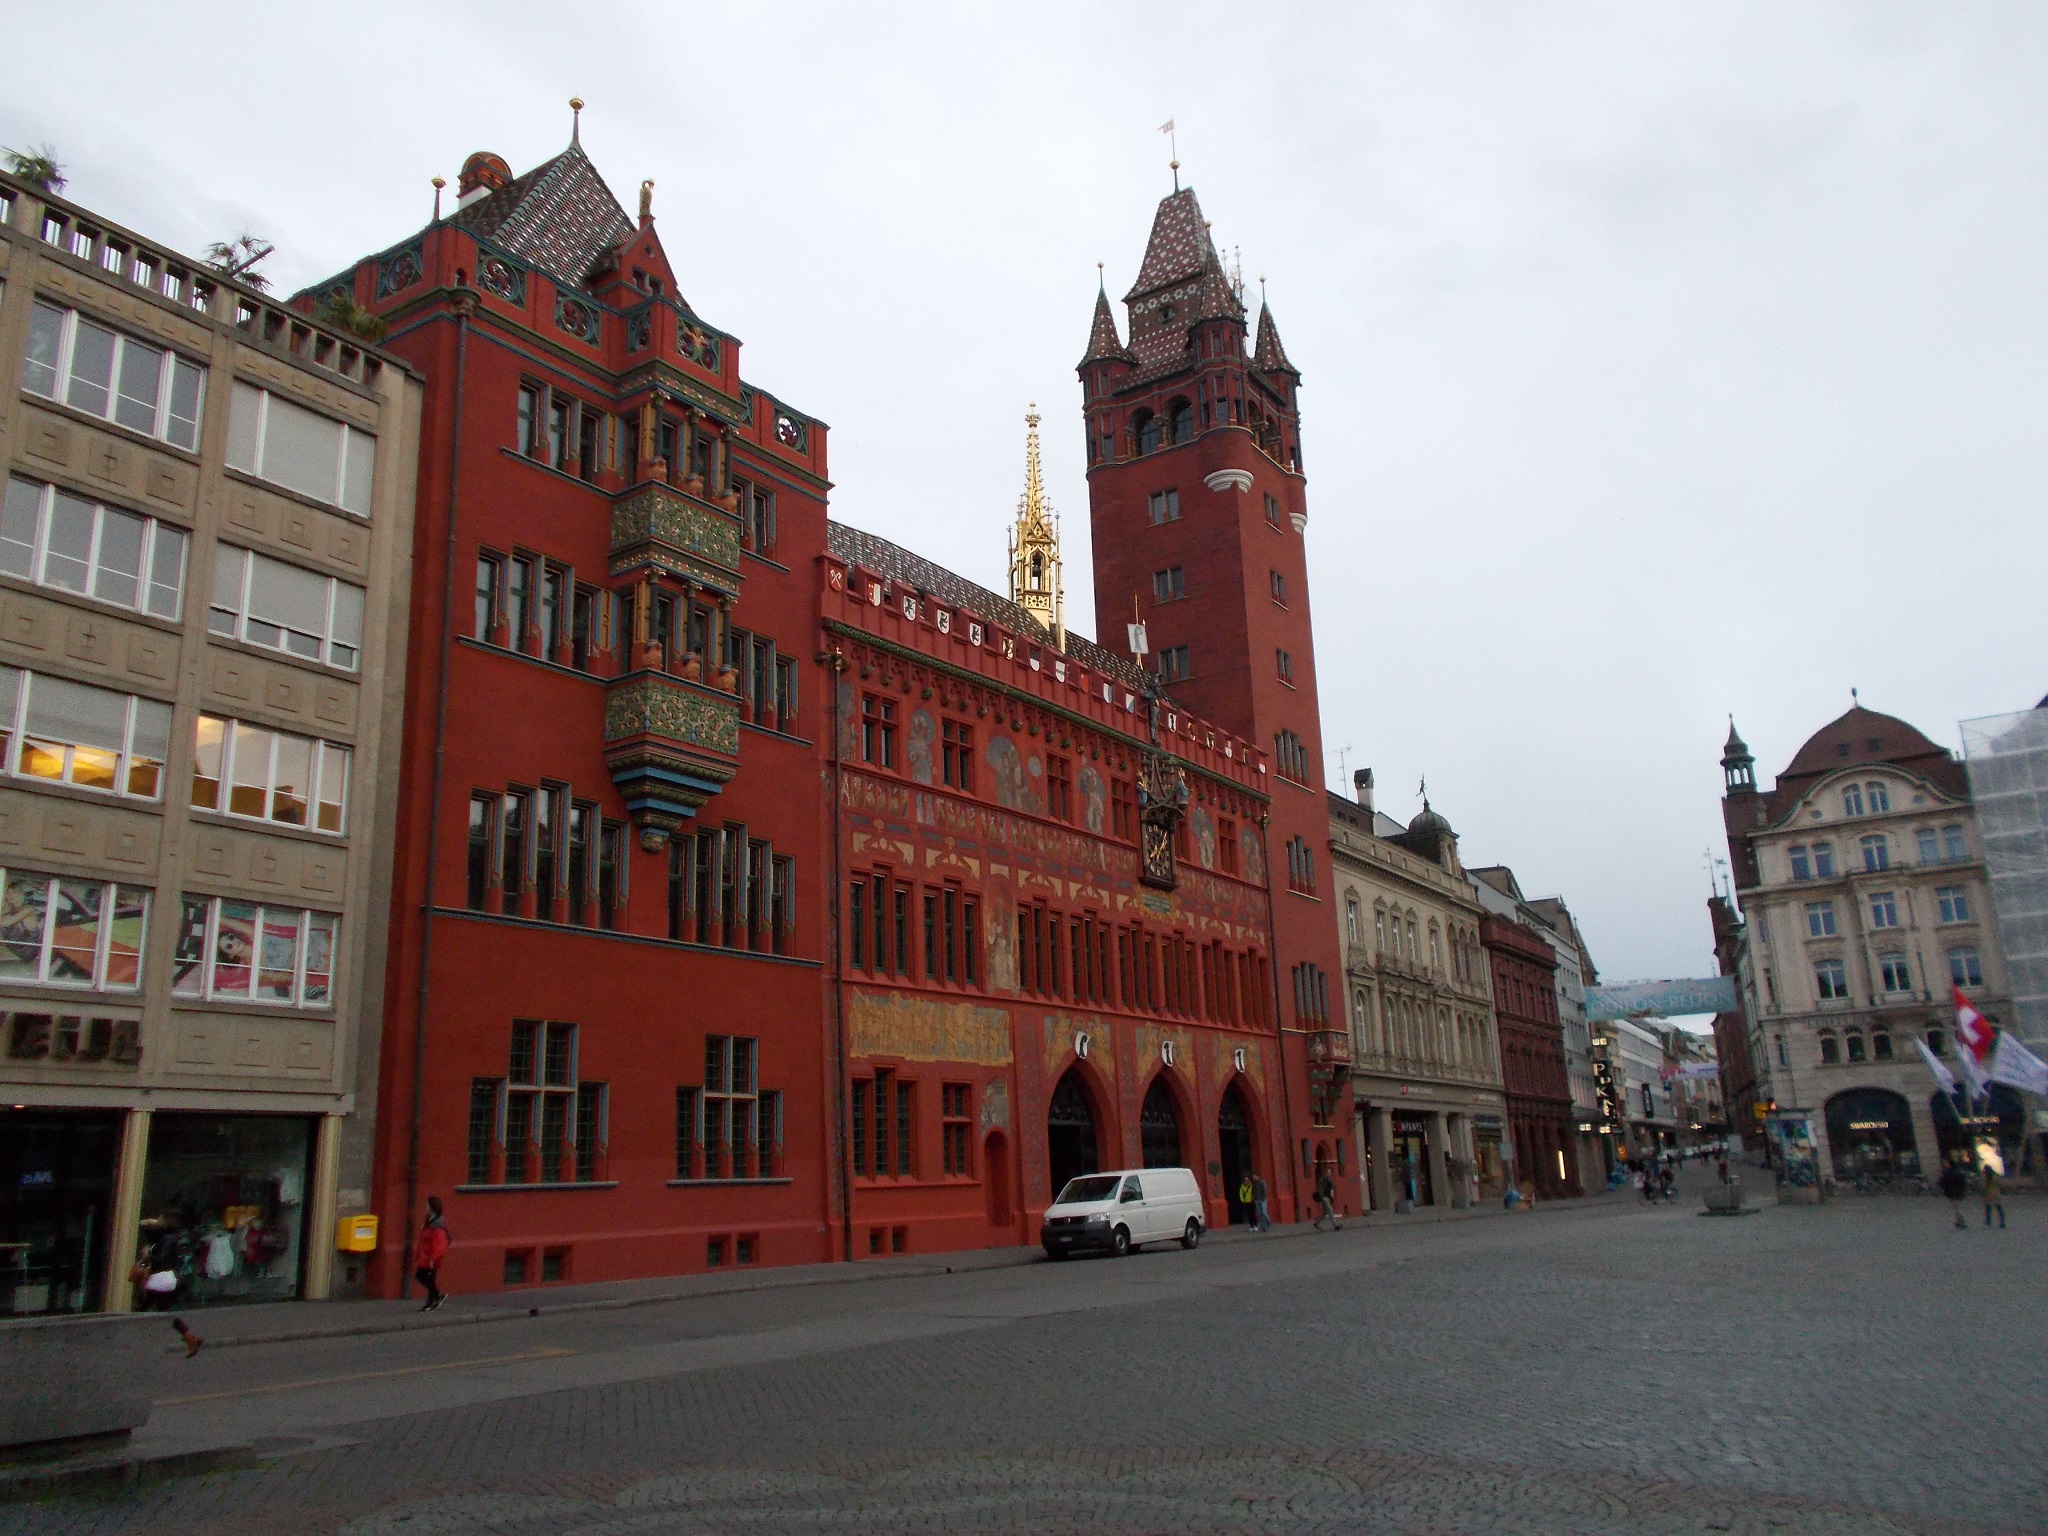 A bright red ornate building on the edge of a large city market square.